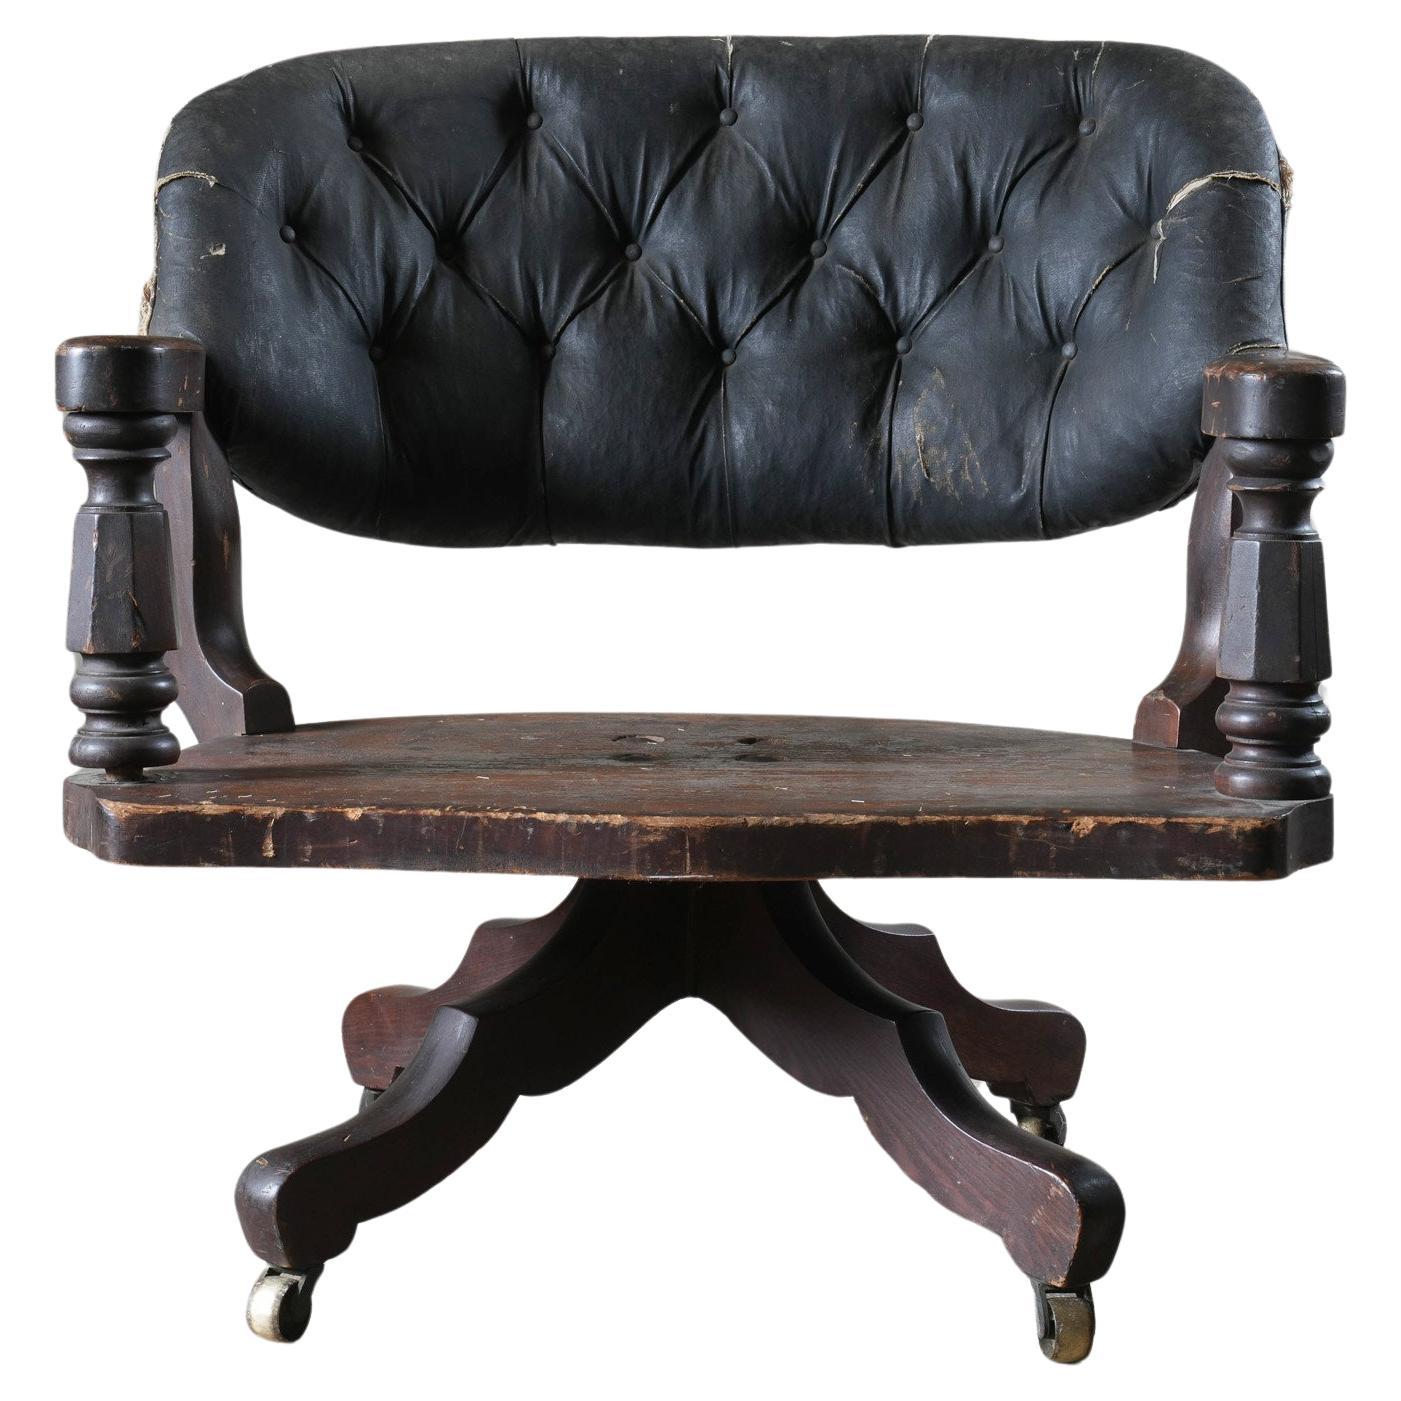 An Oversized 19th Century Desk Chair For Sale